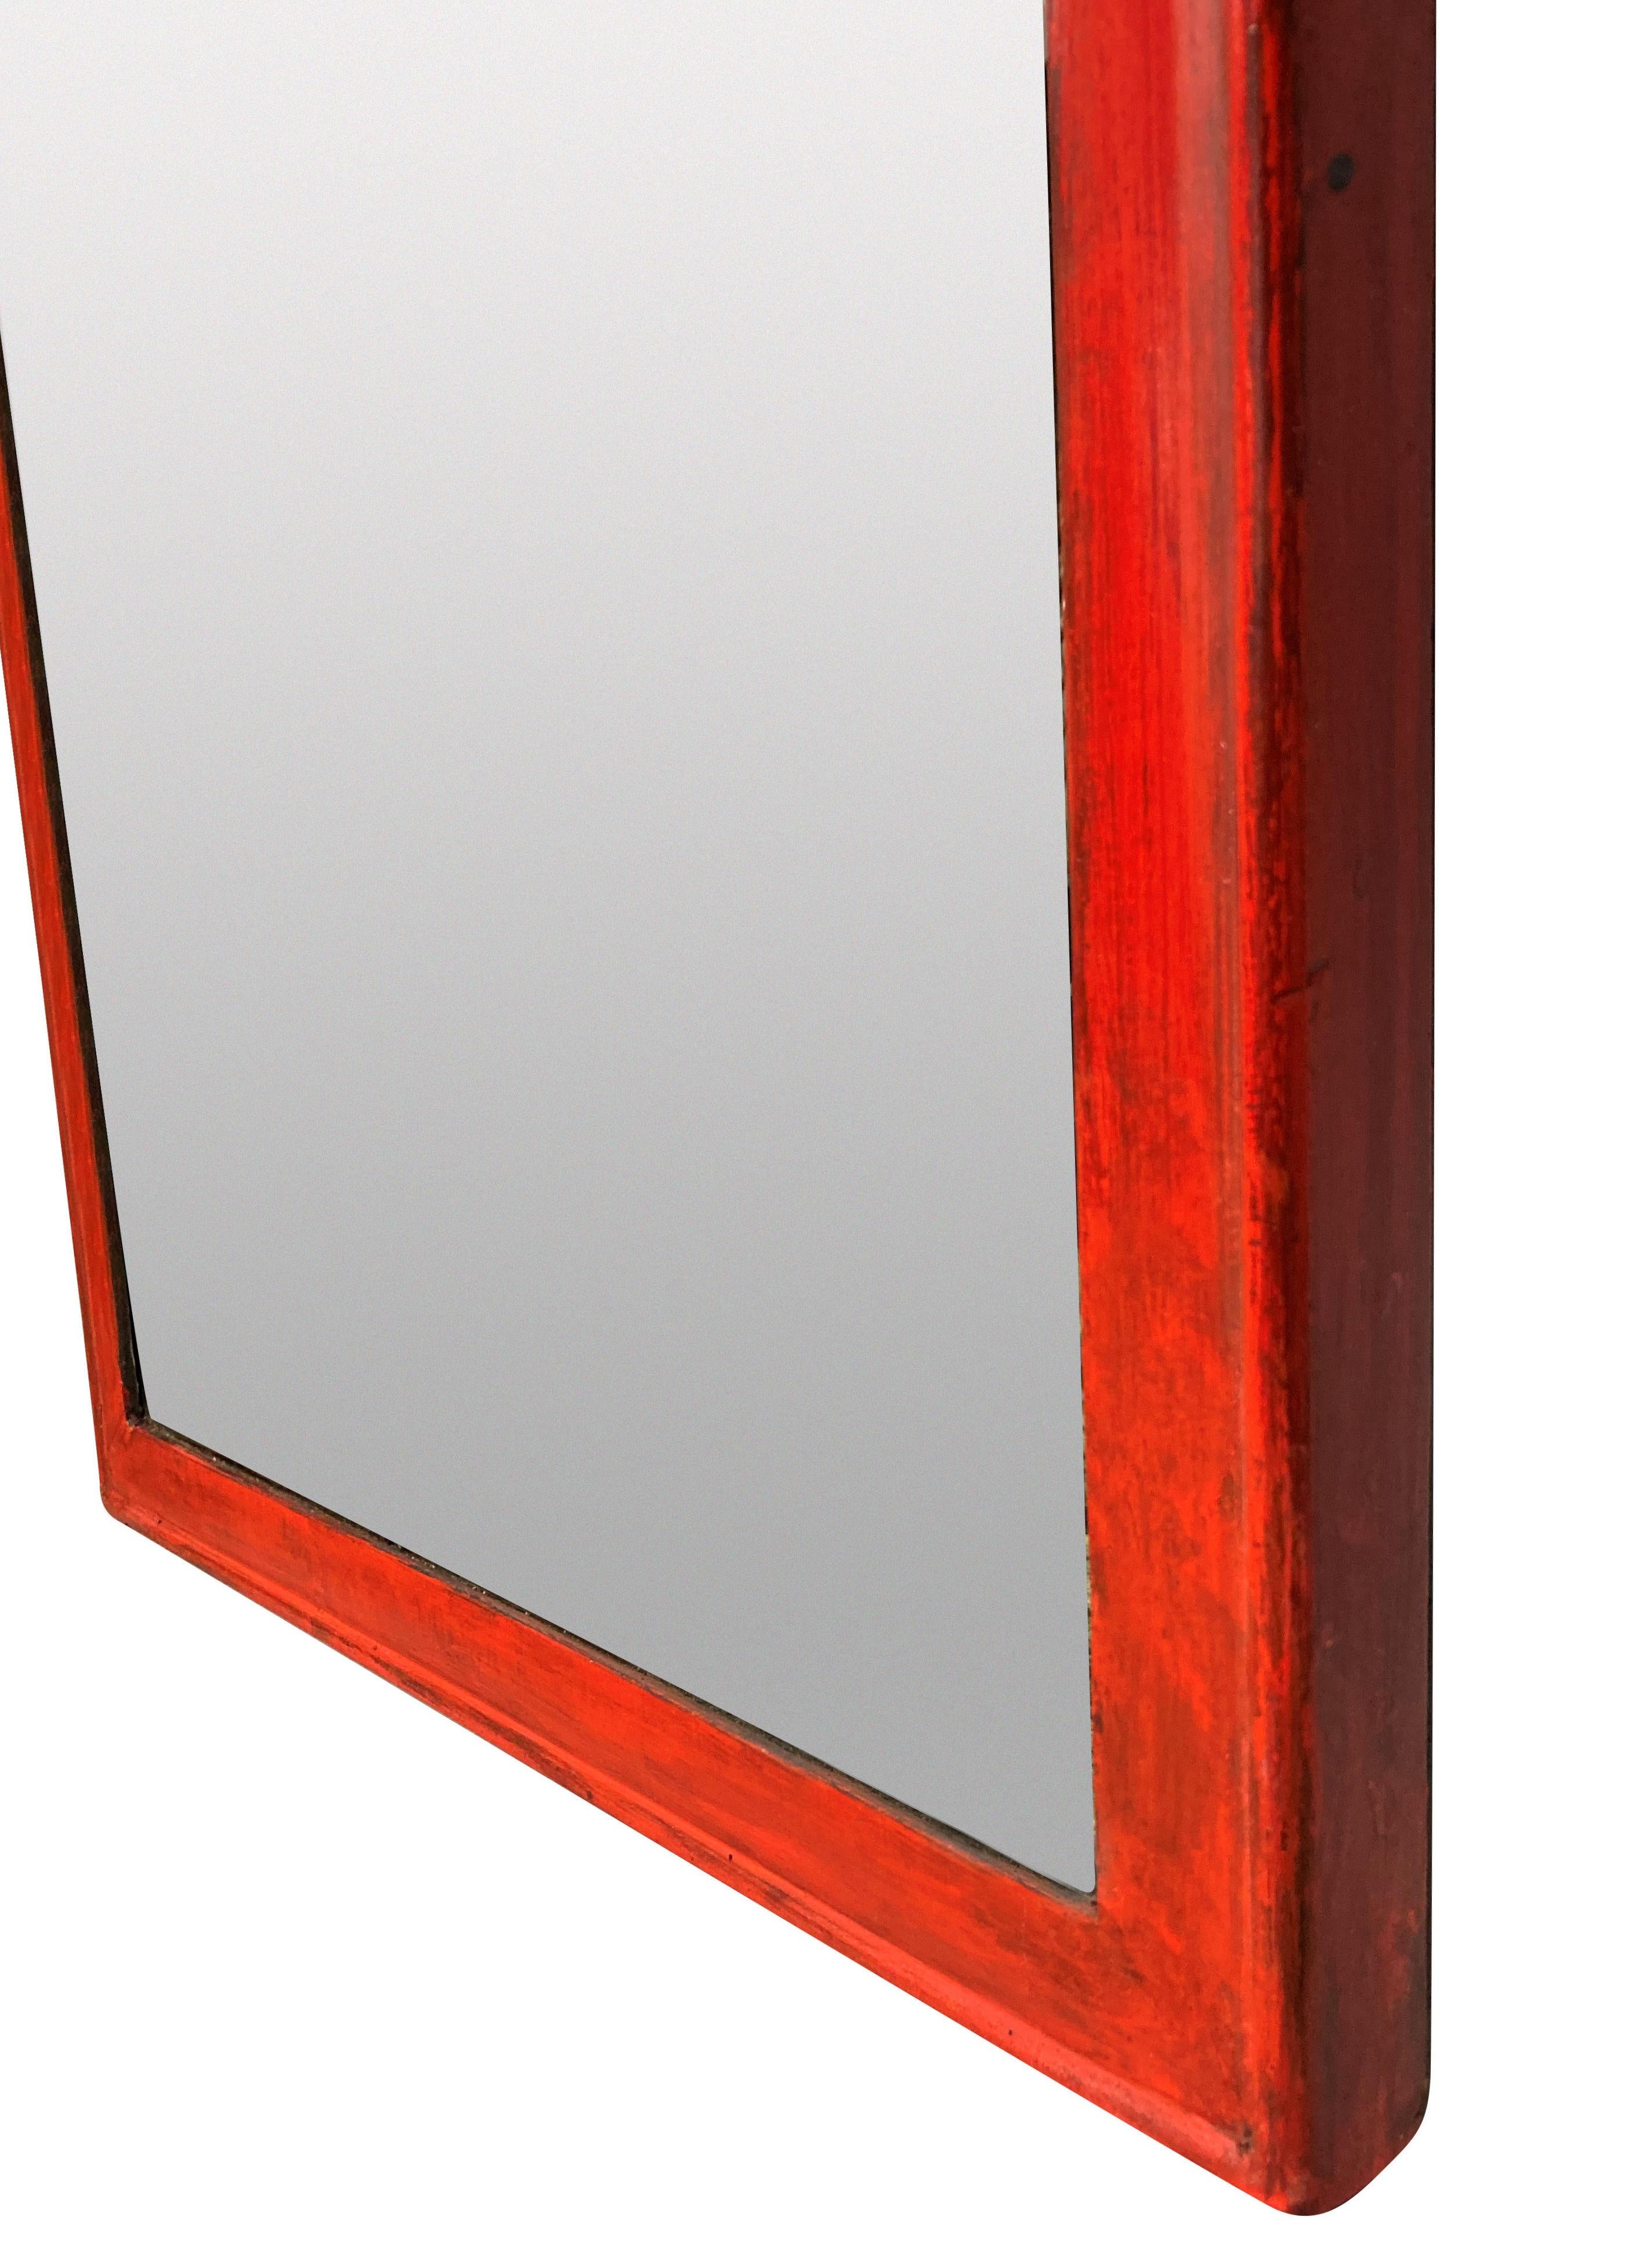 An English Queen Anne style red lacquered slender mirror, which makes up a matched pair with a seperate listing.